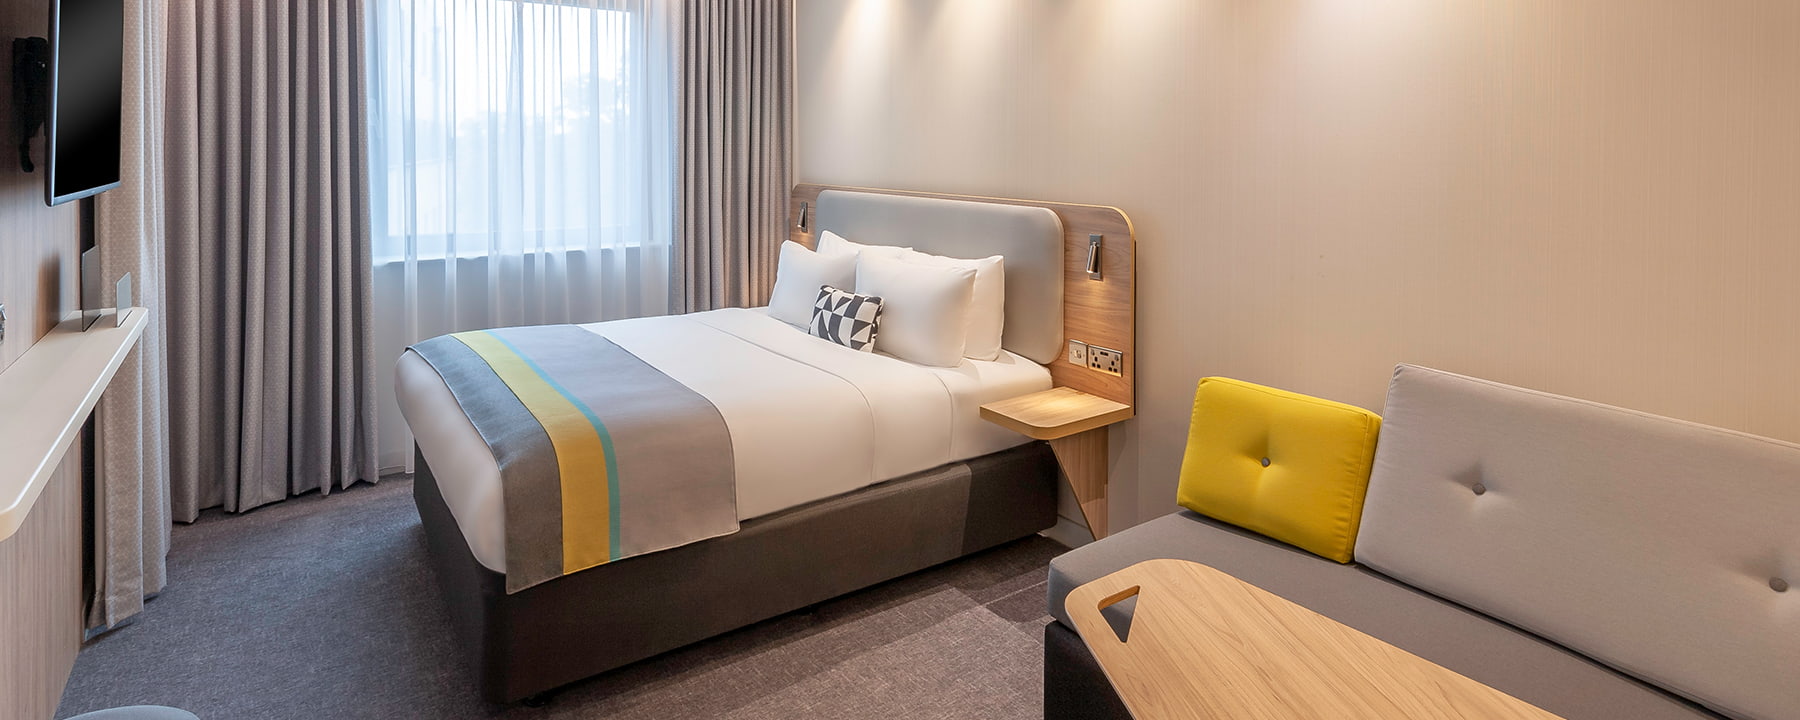 Dublin Airport hotel day let double room